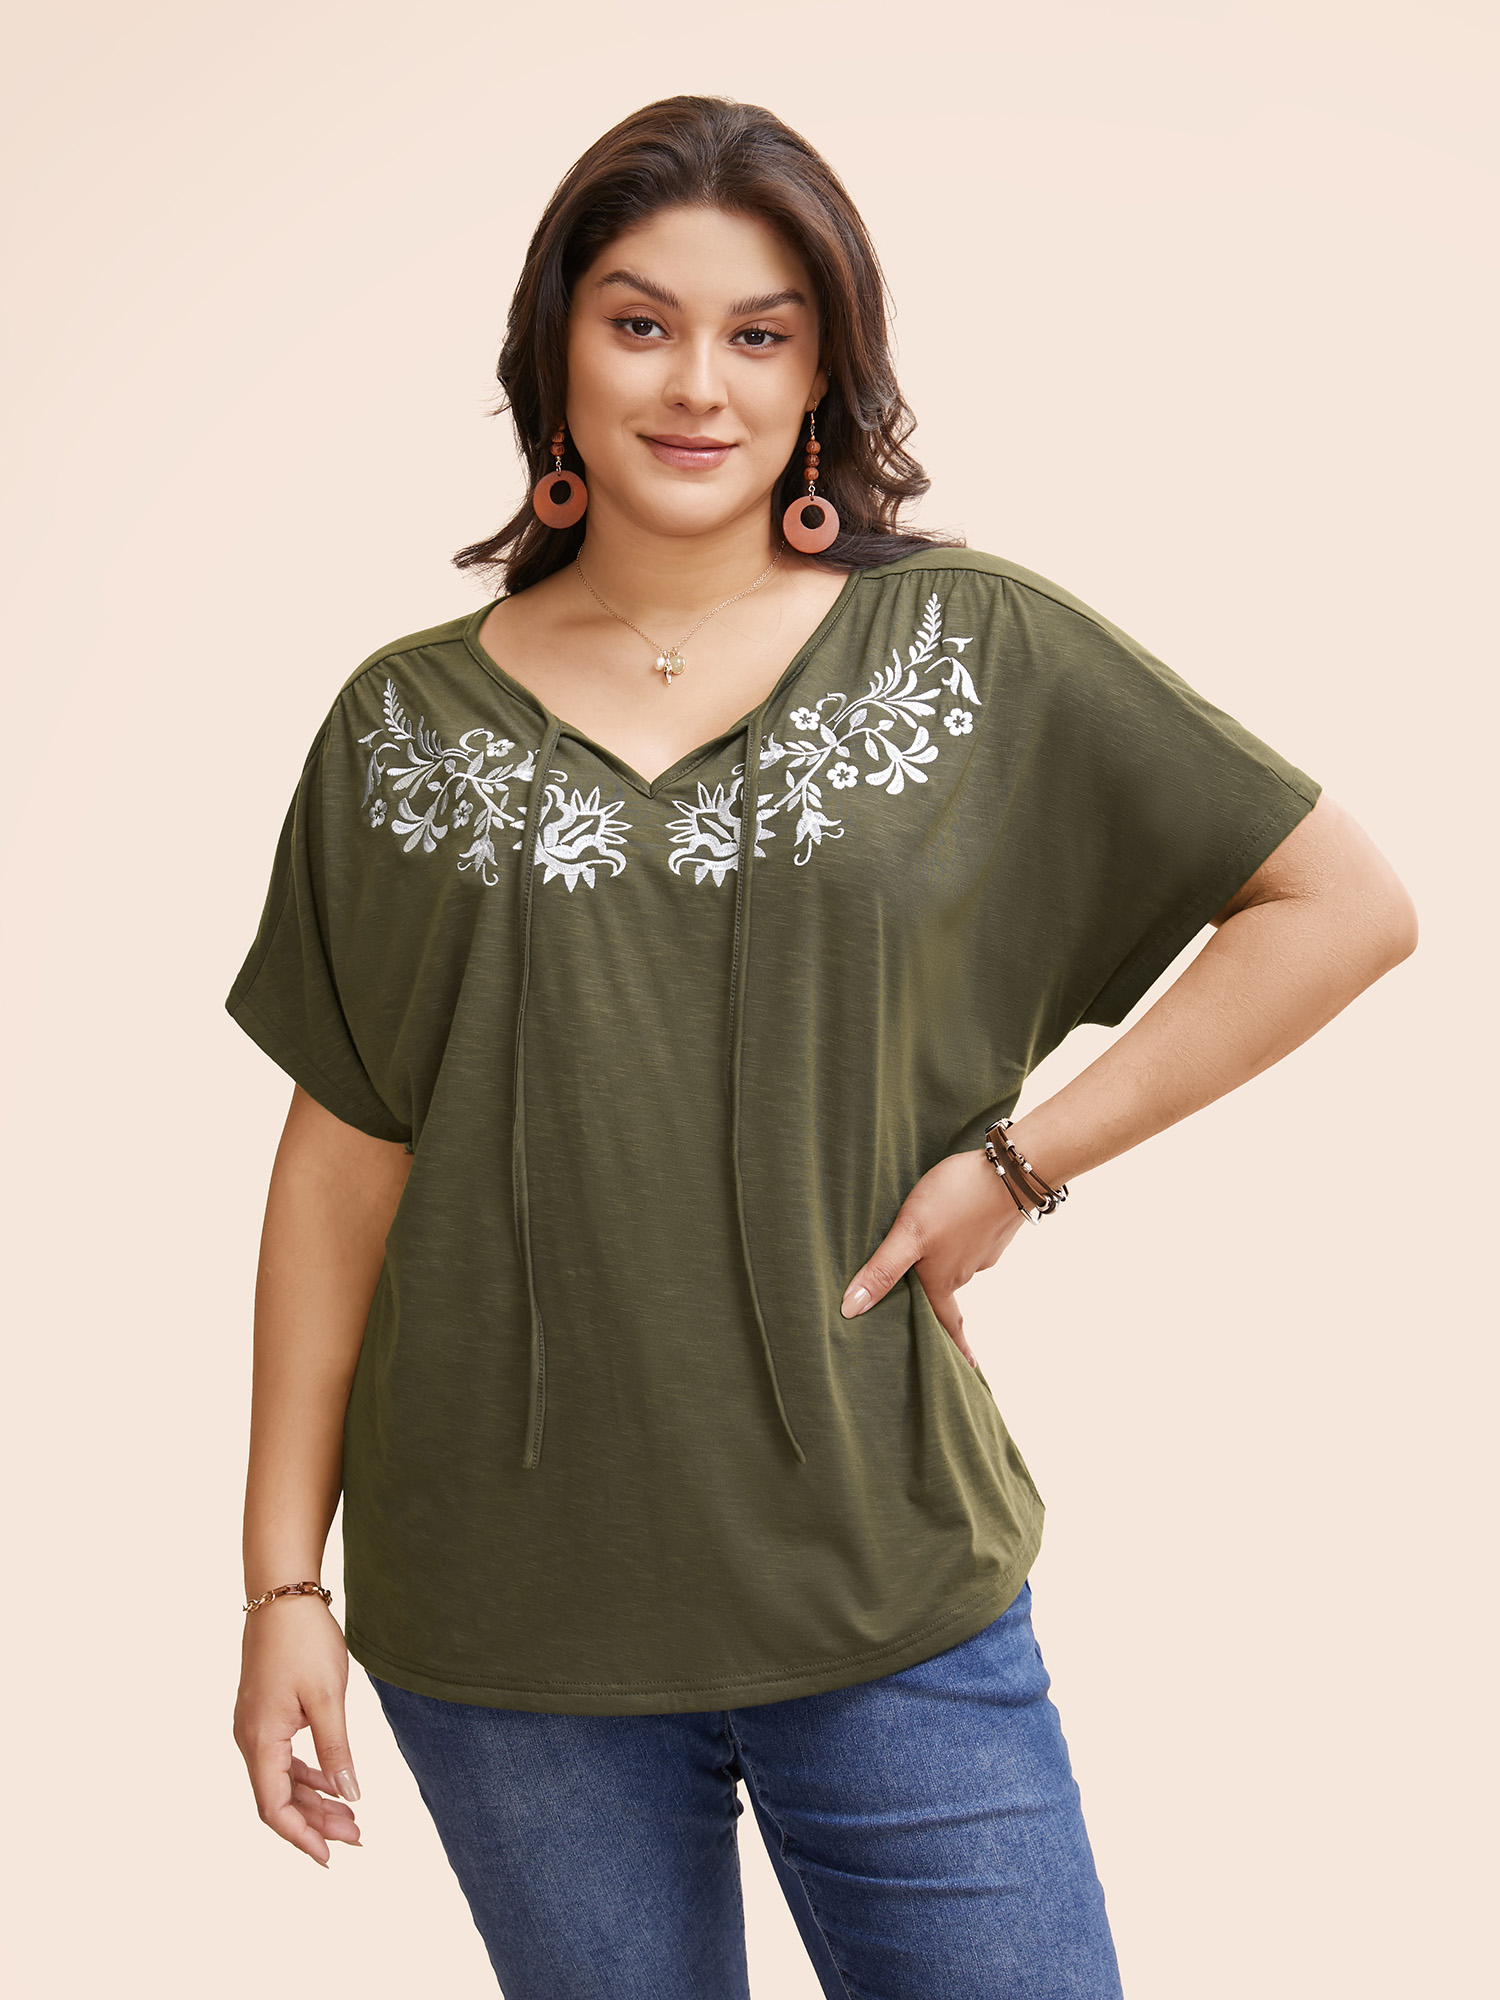 

Plus Size Floral Embroidered Tie Knot Dolman Sleeve T-shirt ArmyGreen Women Resort Tie knot Art&design V-neck Vacation T-shirts BloomChic